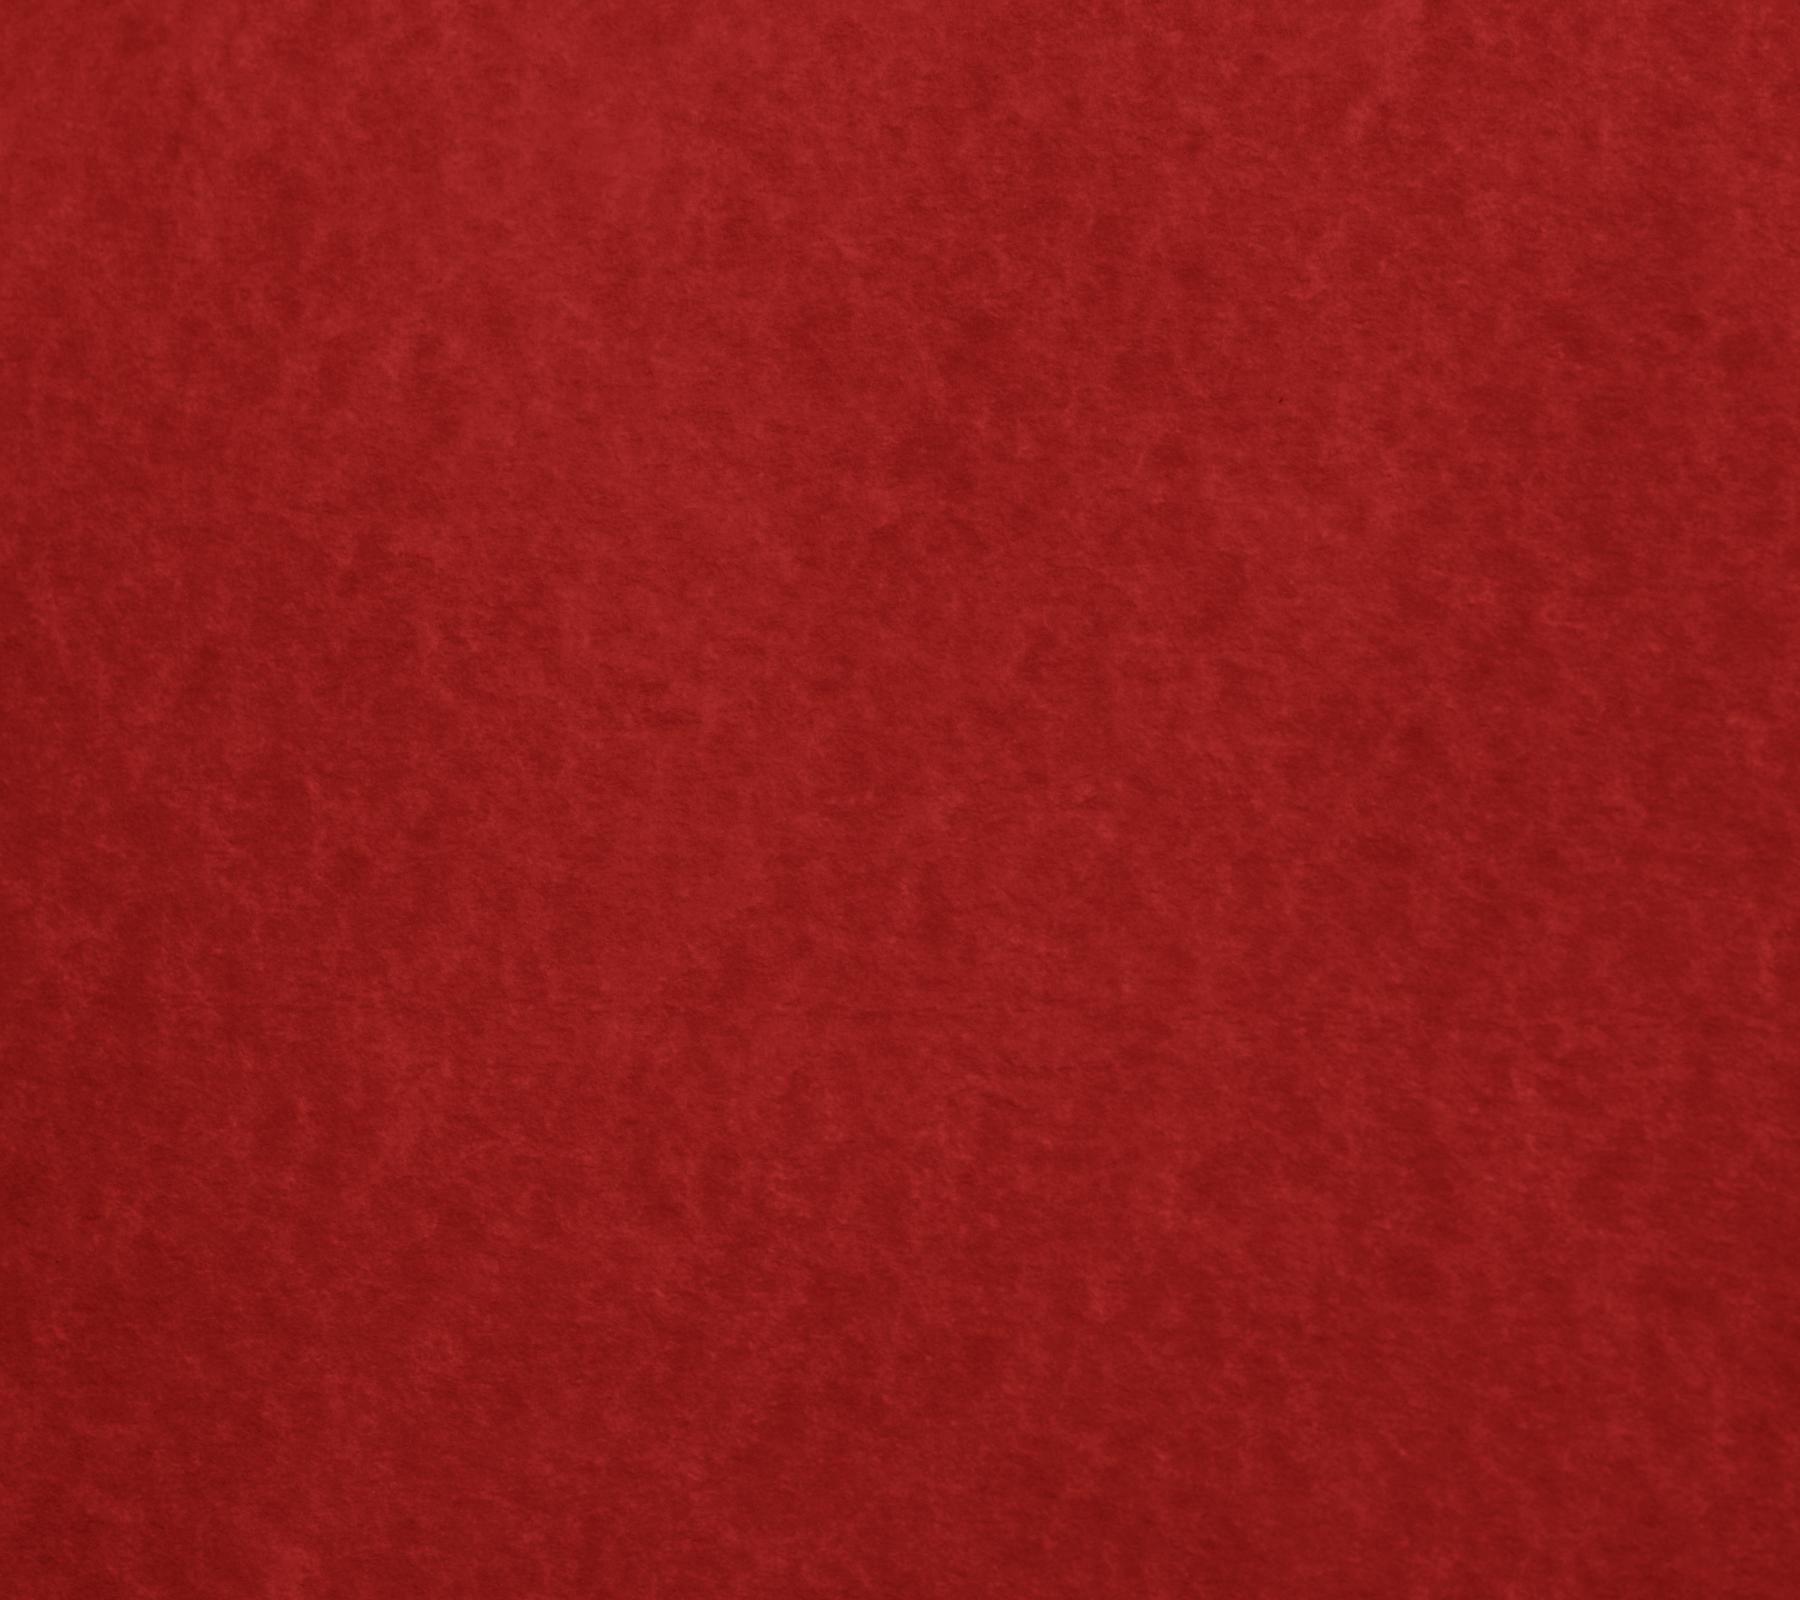 Deep Red Parchment Paper Background Image